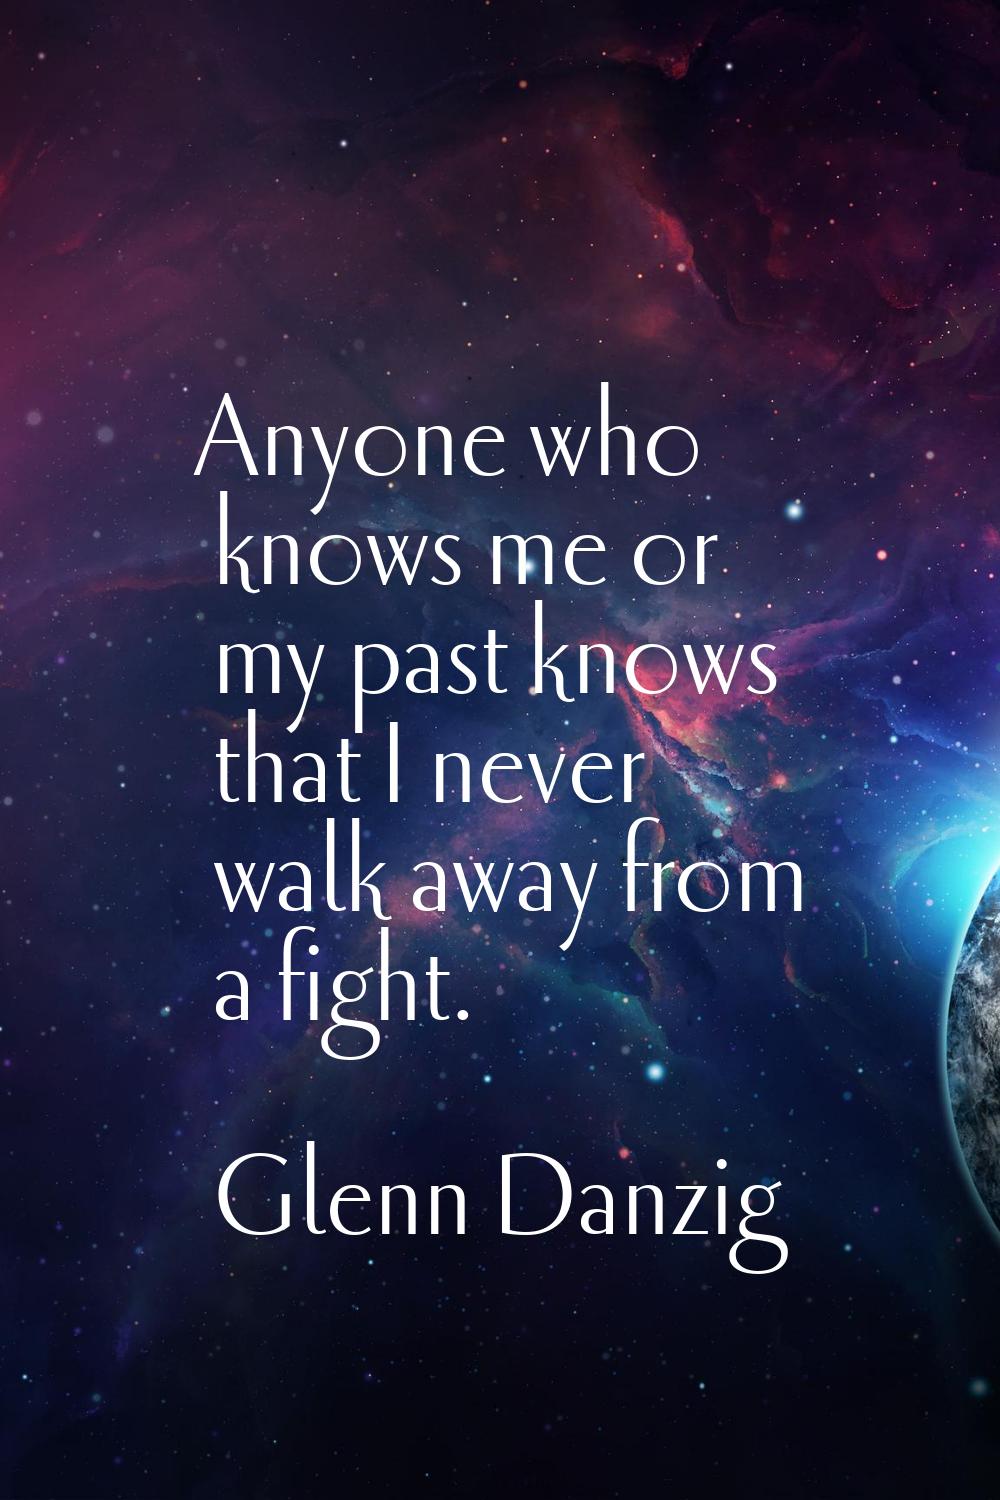 Anyone who knows me or my past knows that I never walk away from a fight.